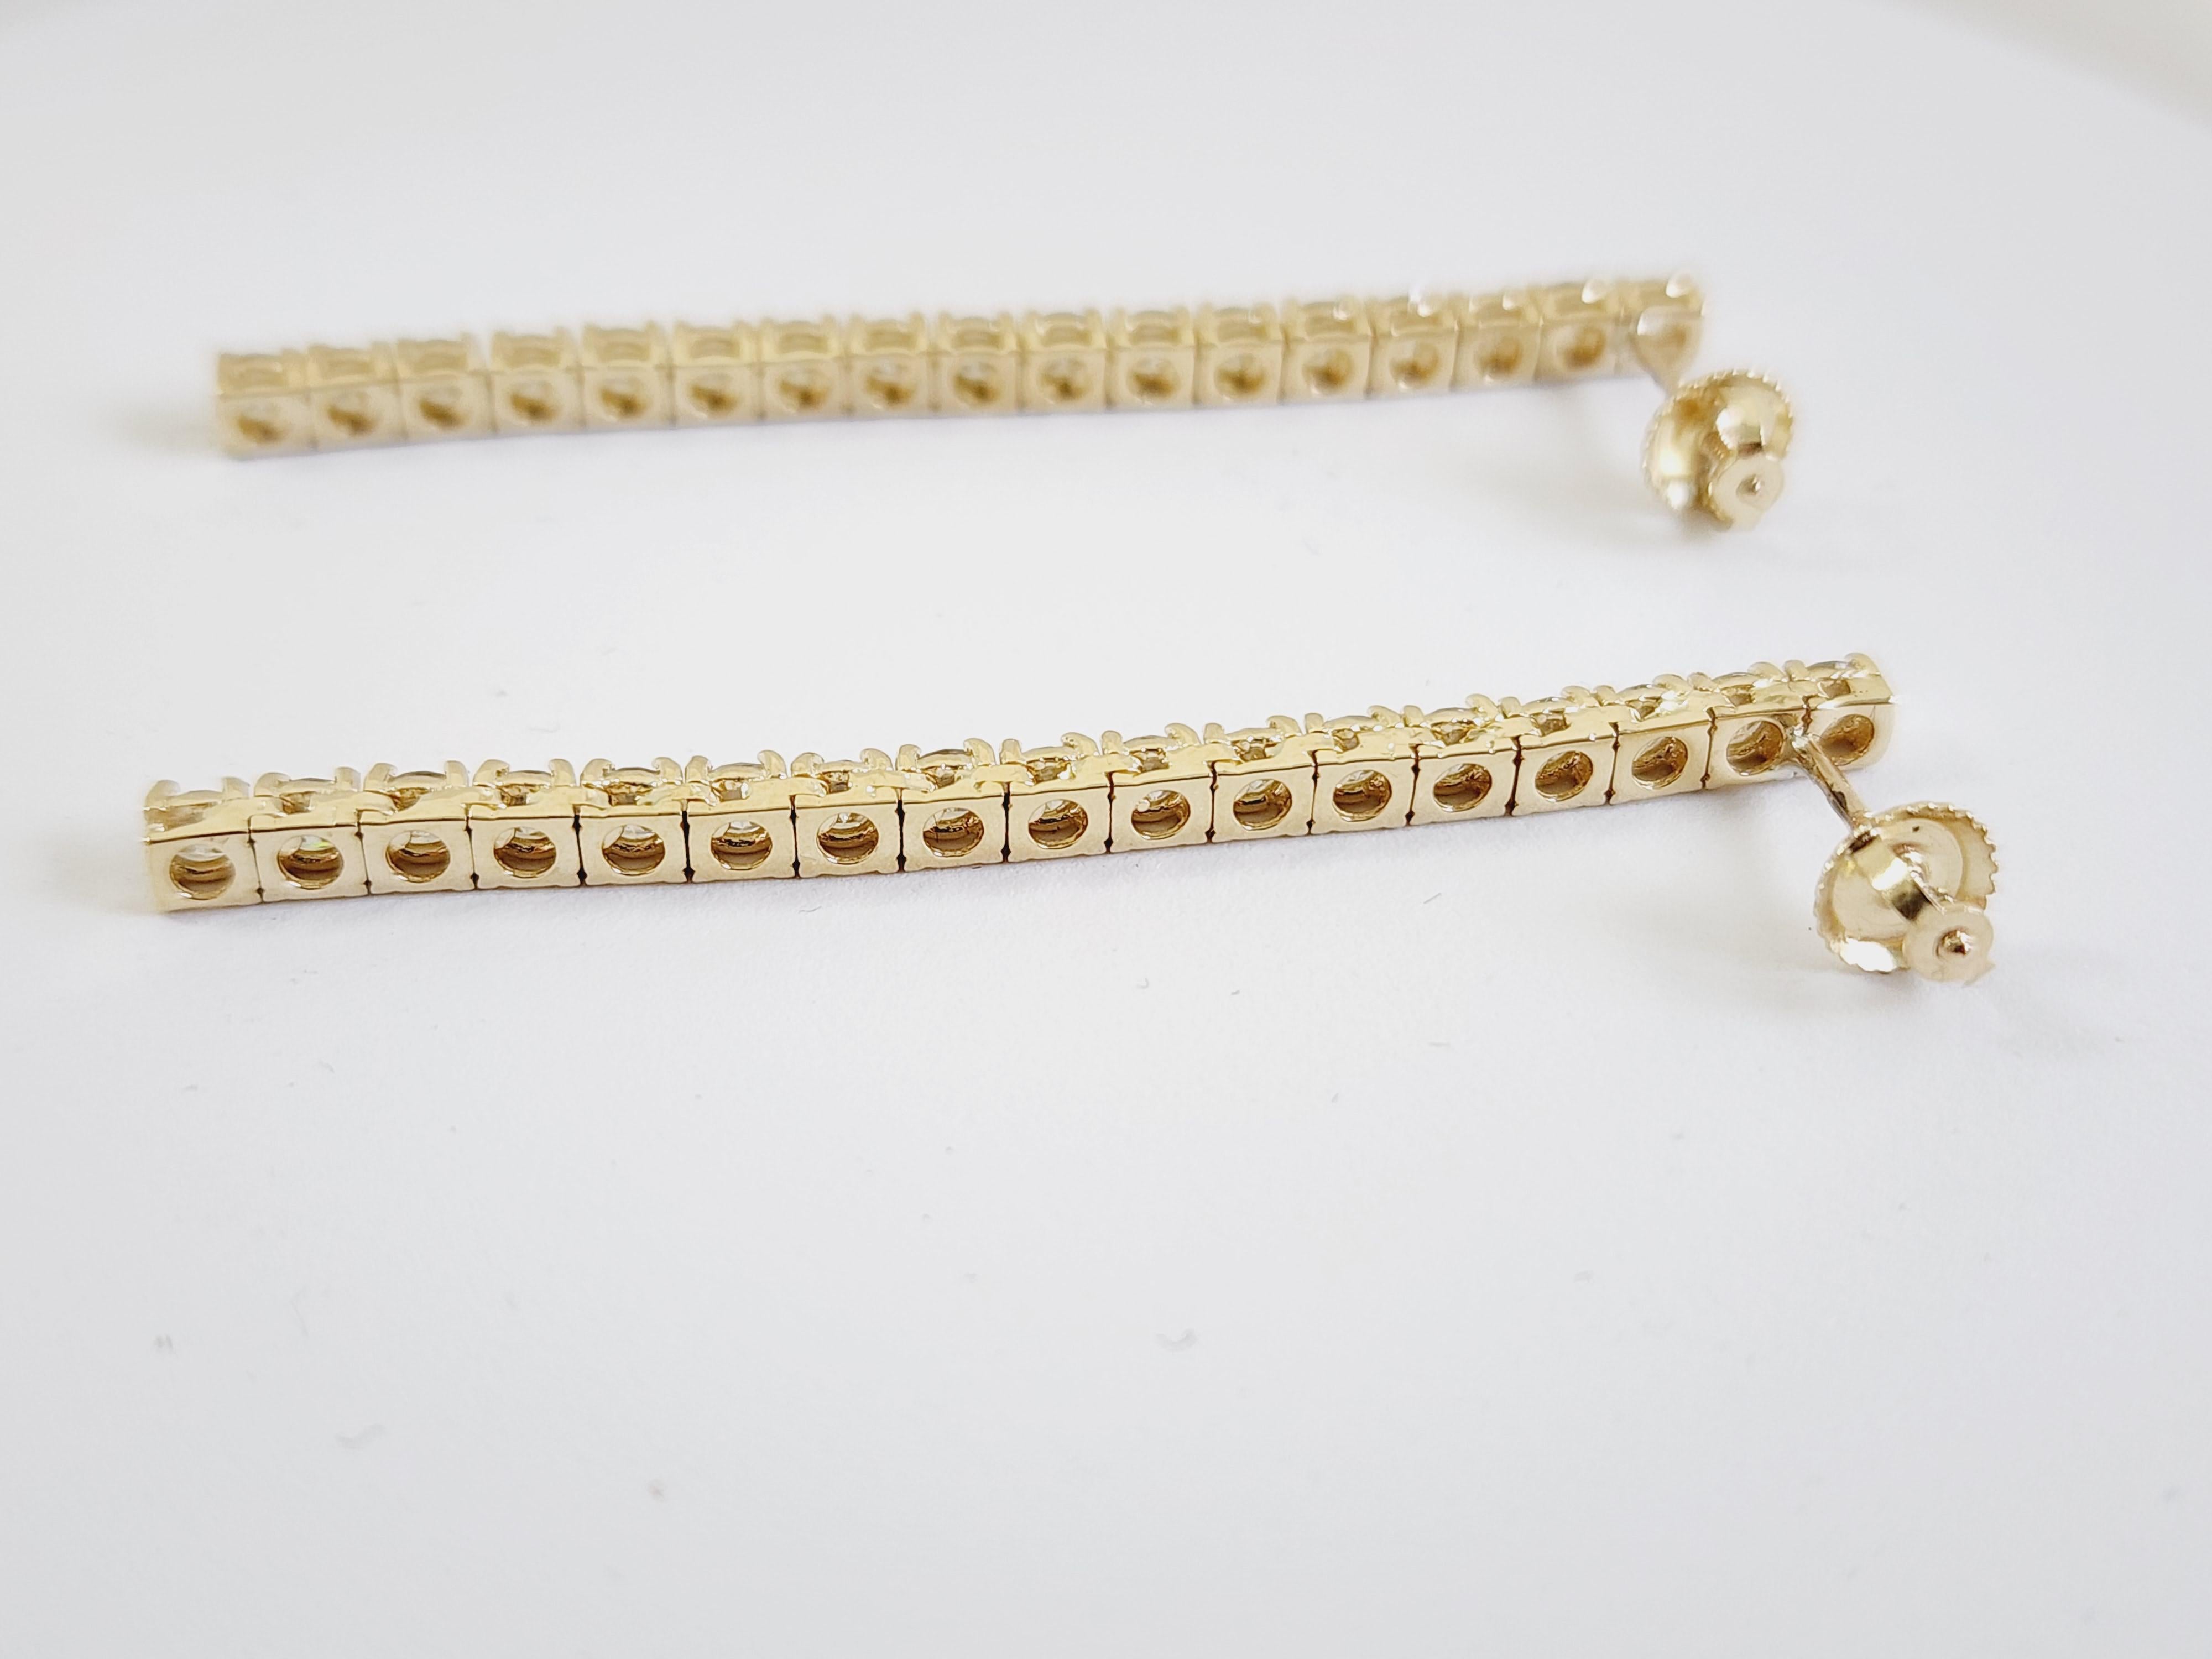 Tennis Earrings Italian made 14K yellow gold.
The total weight is 3.07 carats. Beautiful shiny natural diamonds.
The total length is 2 inch drop. screw back setting for secure wear.

*Free shipping within U.S*